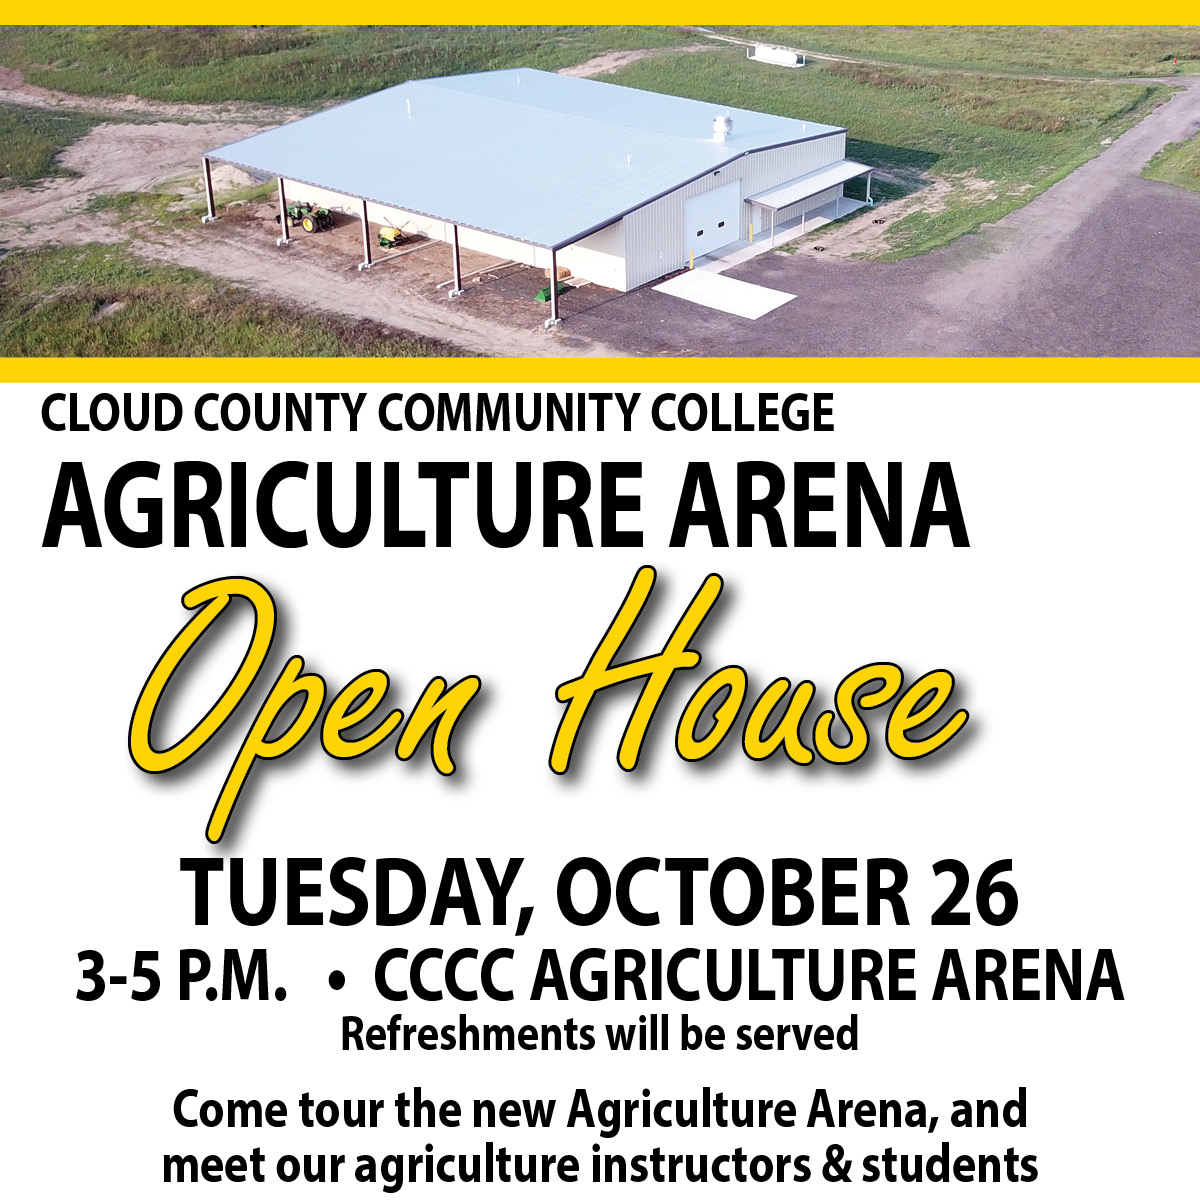 The Ag arena open house is October 26.